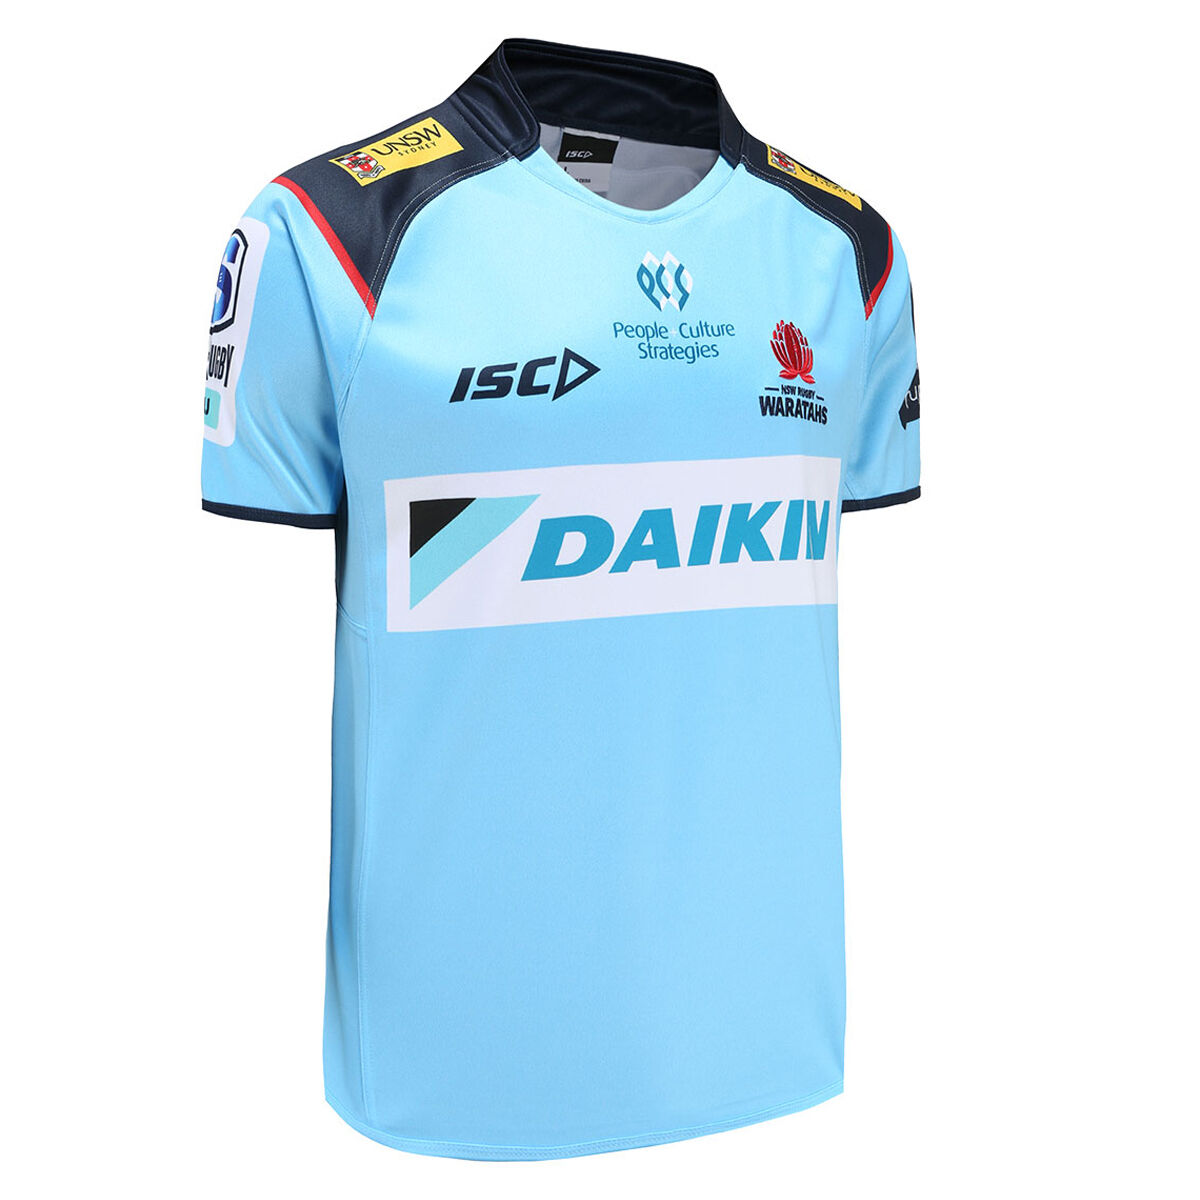 NSW Waratahs Home Jersey Size Small New South Wales CCC Super Rugby 16 